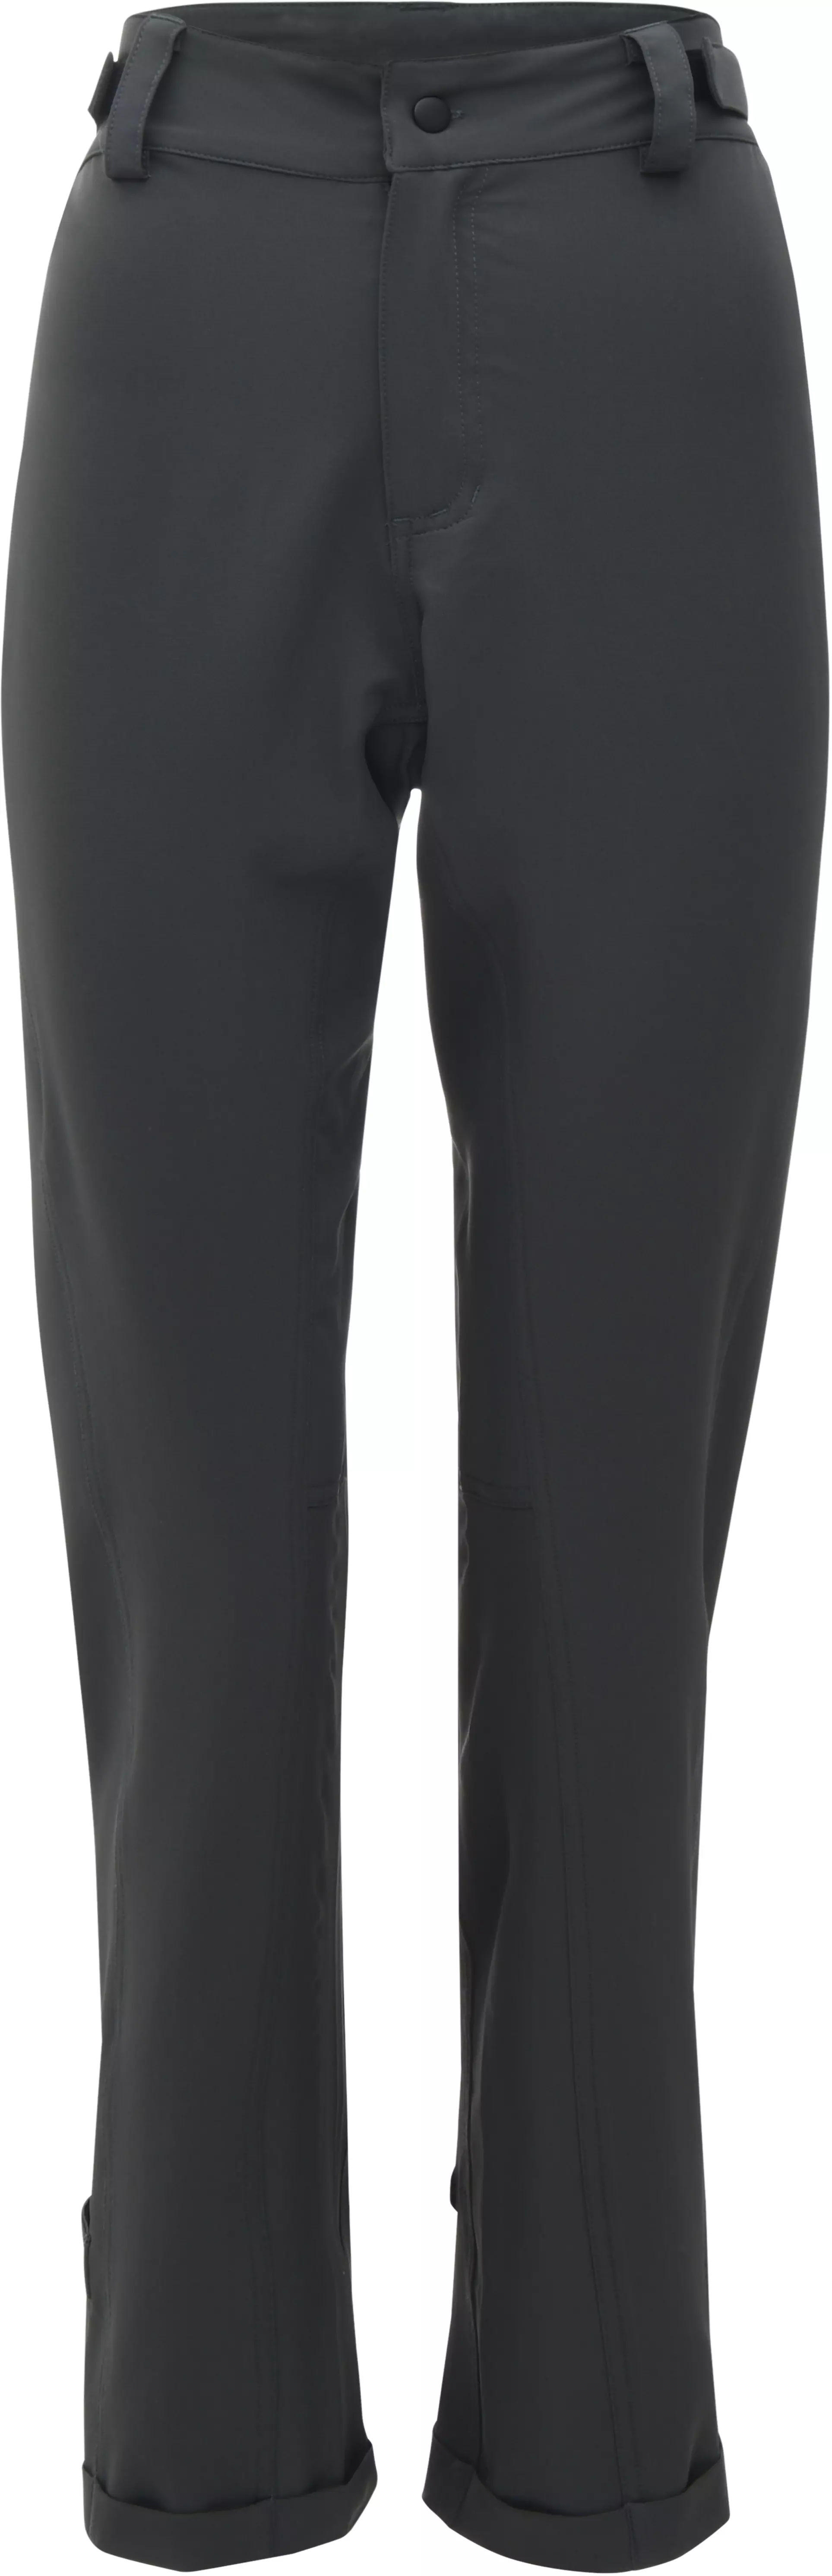 cycling trousers womens